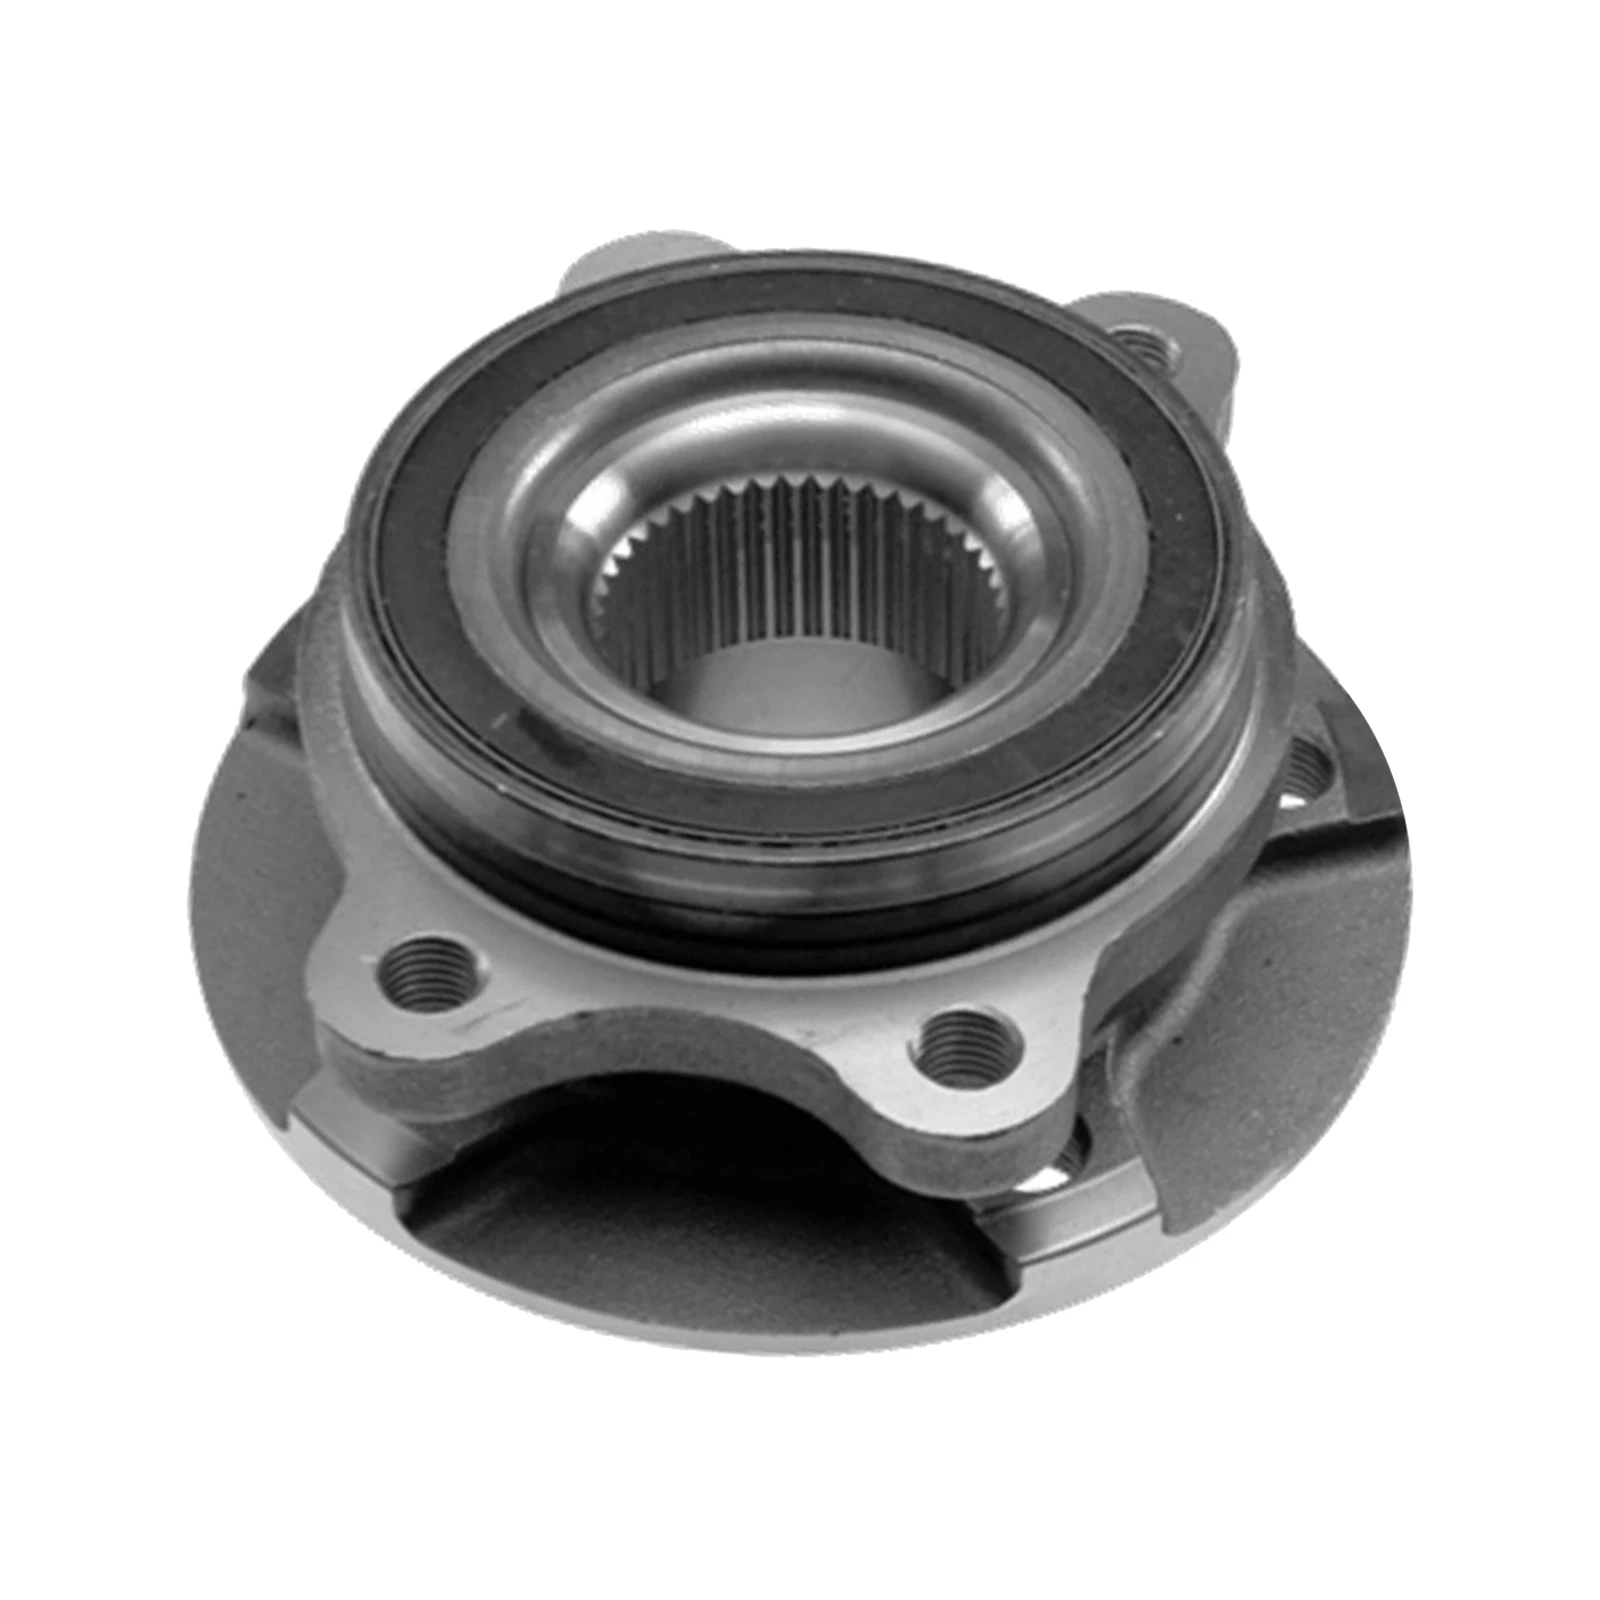 Front Wheel Bearing Hub Assembly Compatible for Audi A4, 2009-2015 A5 2010-2014, 2012-2015, Q5 2009-2015 S4 2008-2015